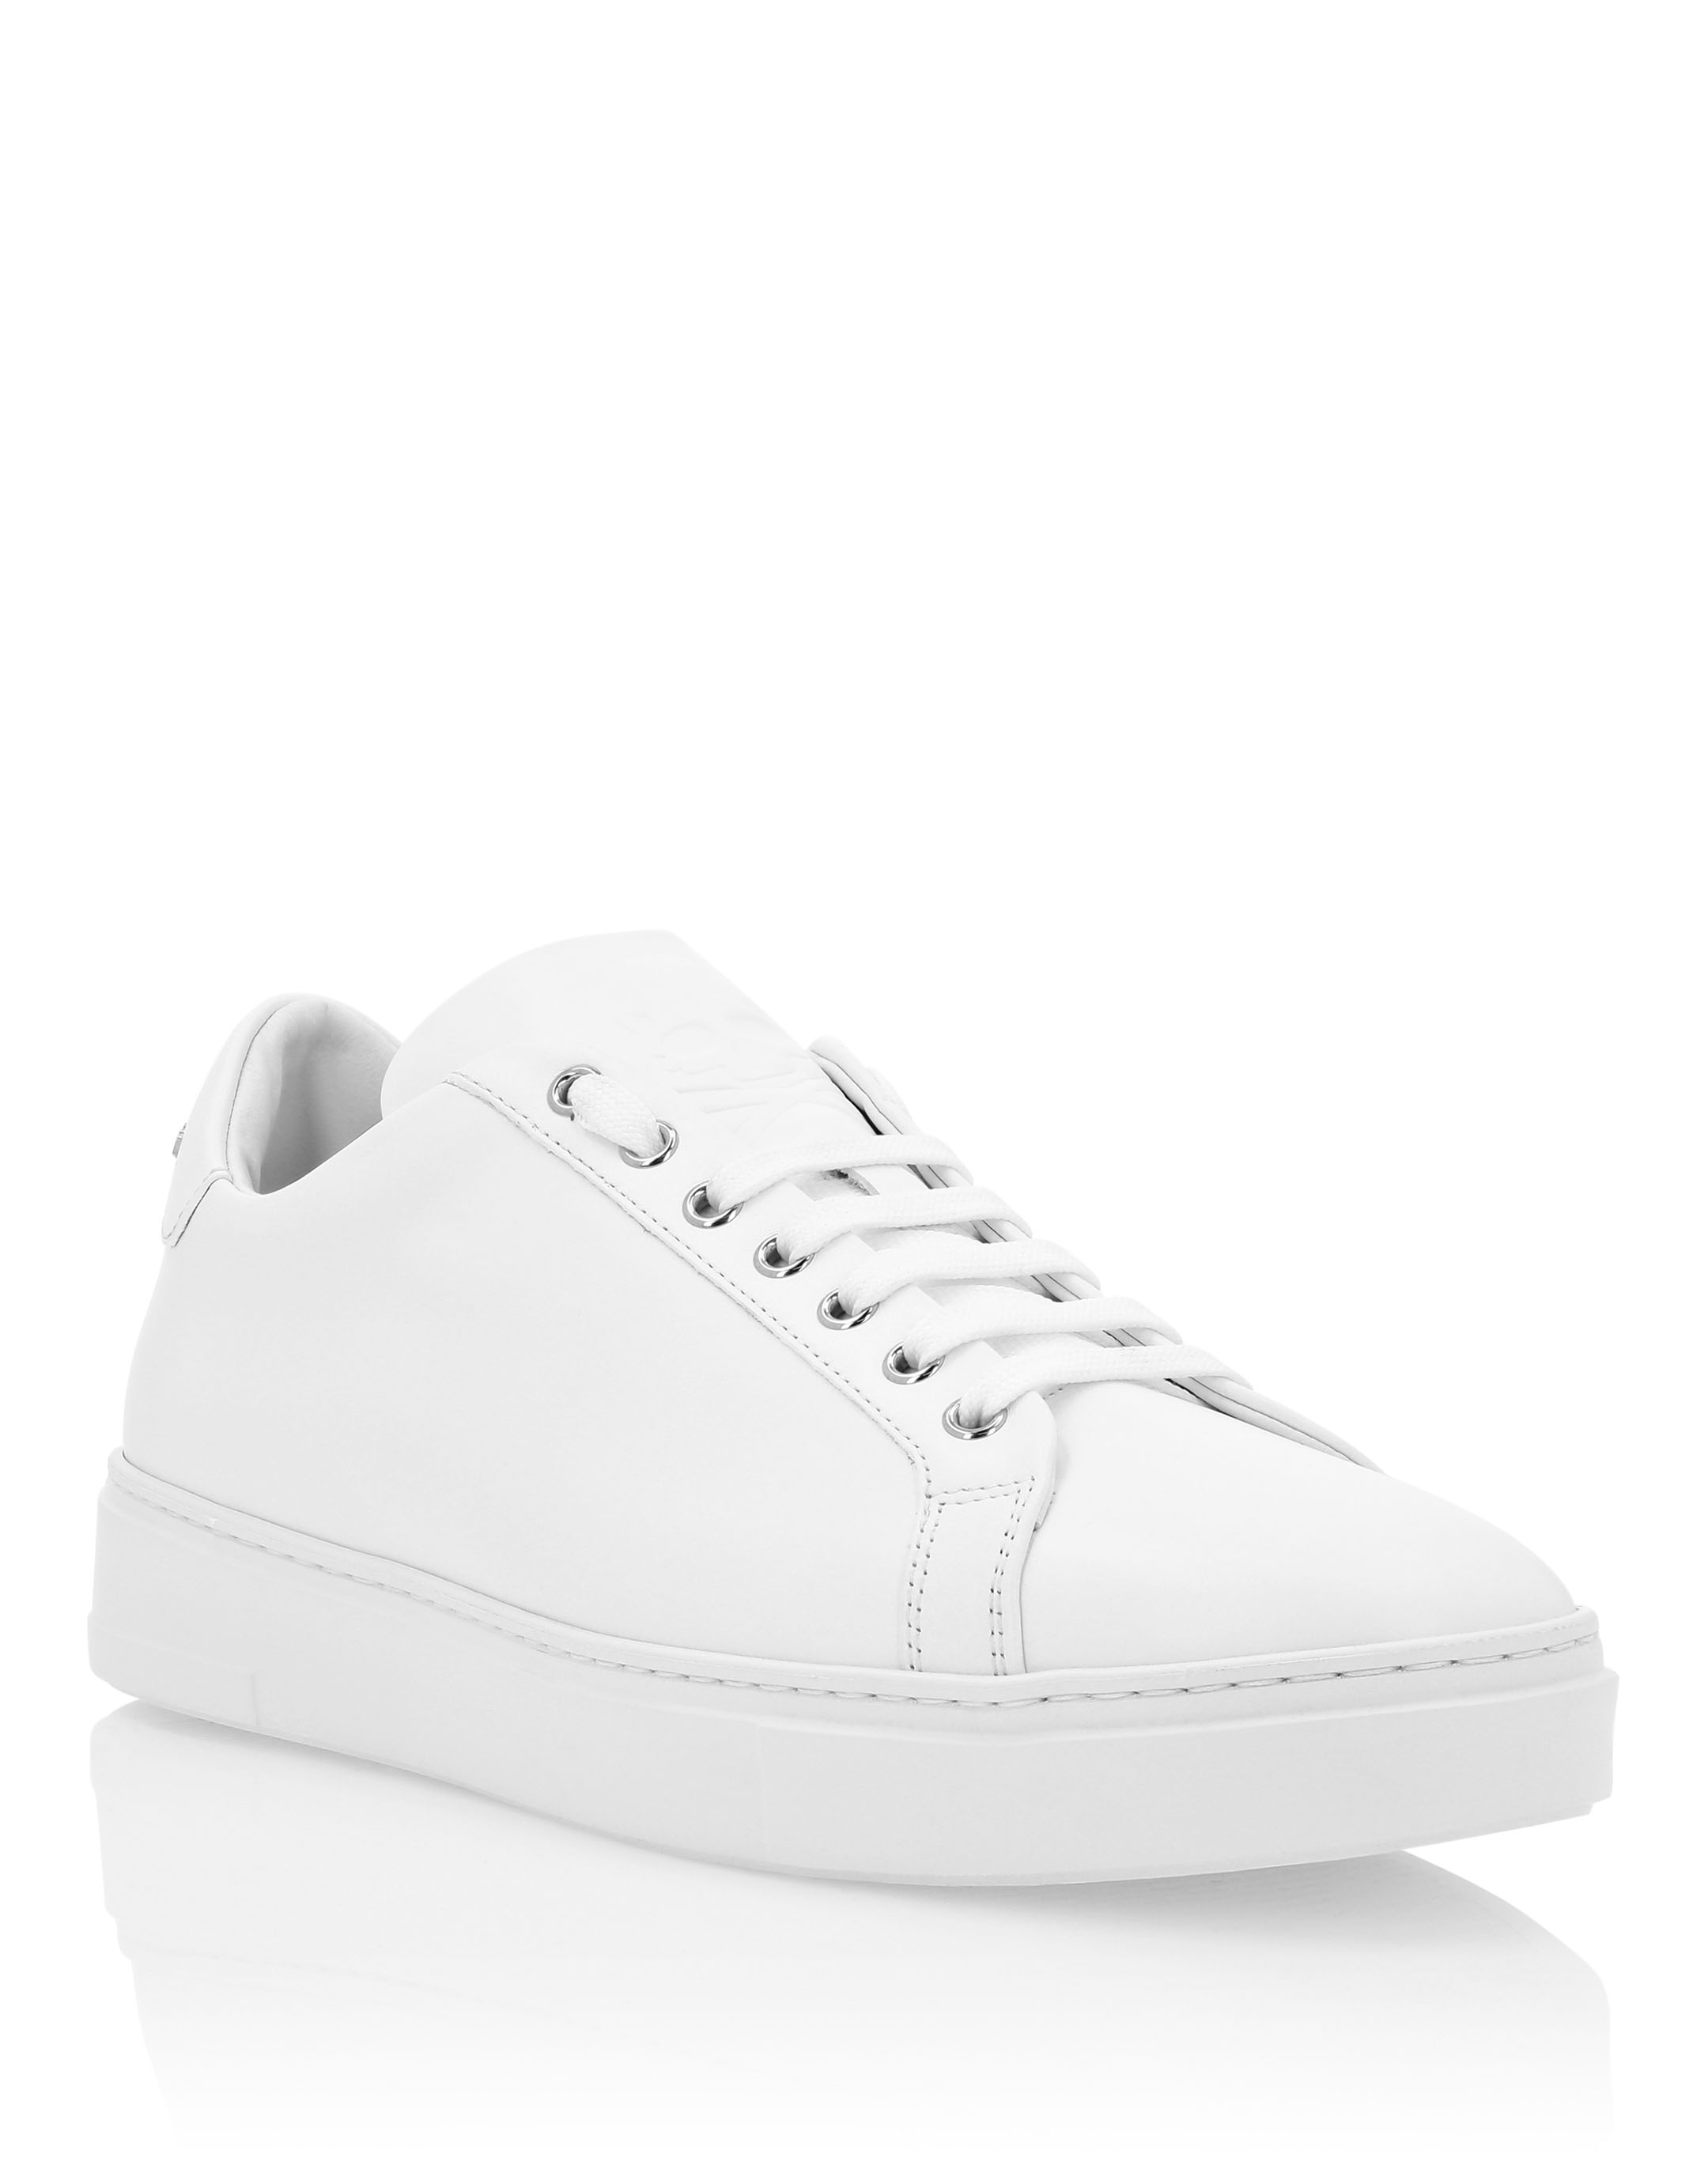 chanel silver and white sneakers